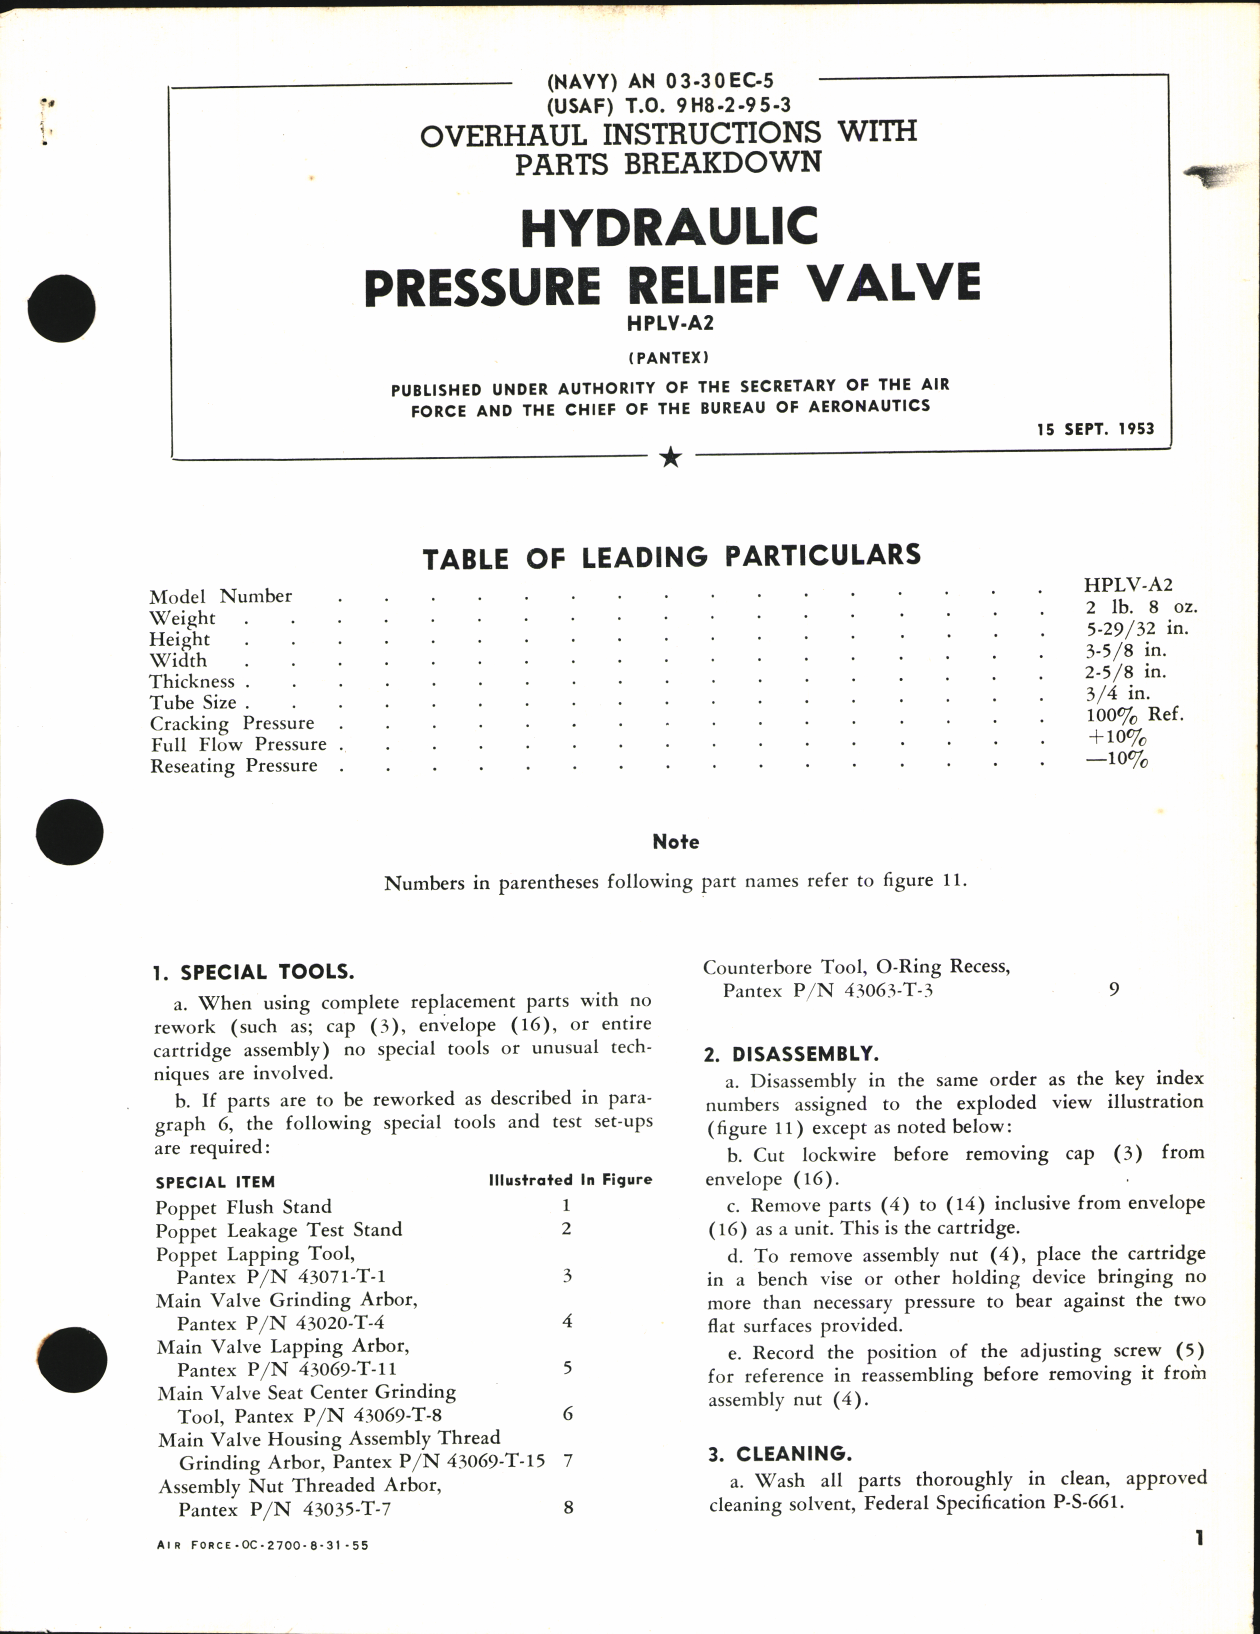 Sample page 1 from AirCorps Library document: Overhaul Instructions with Parts Breakdown for Hydraulic Relief Valve HPLV-A2